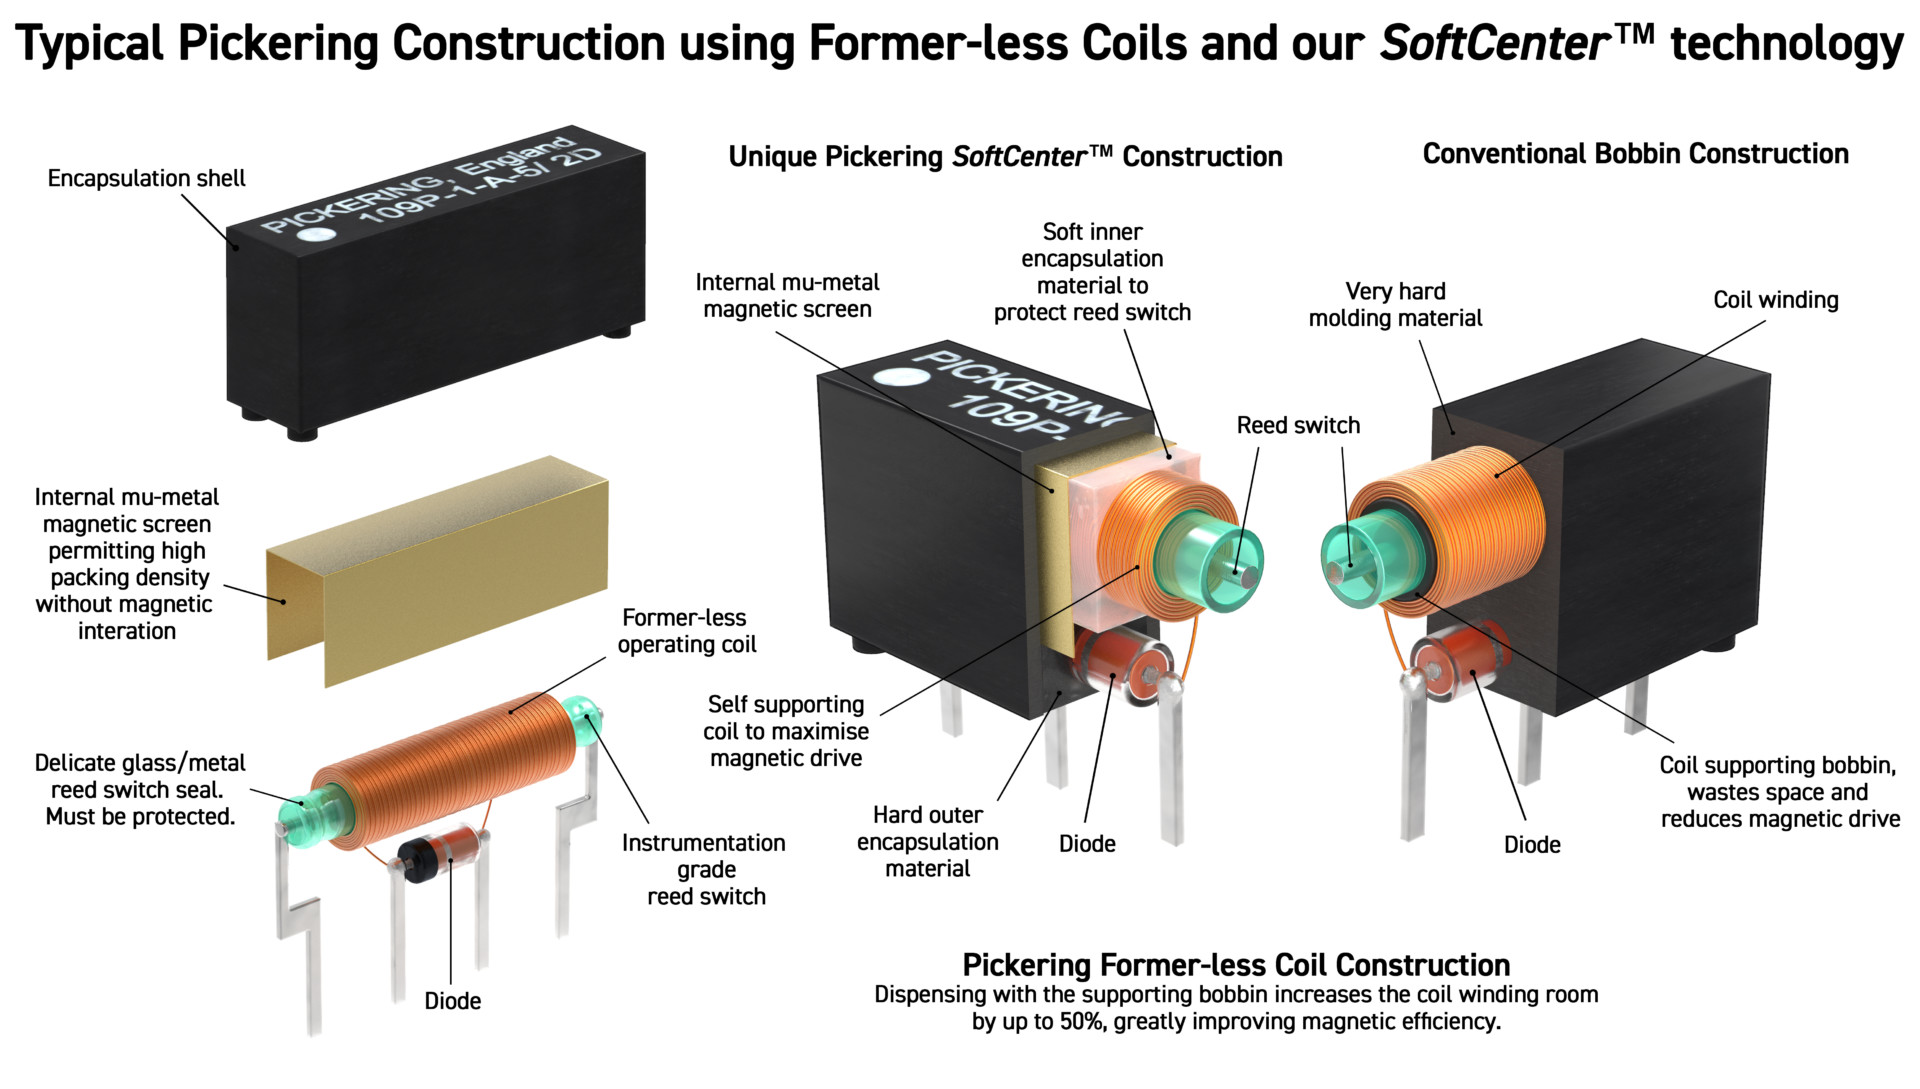 Pickering’s SoftCentreTM technology